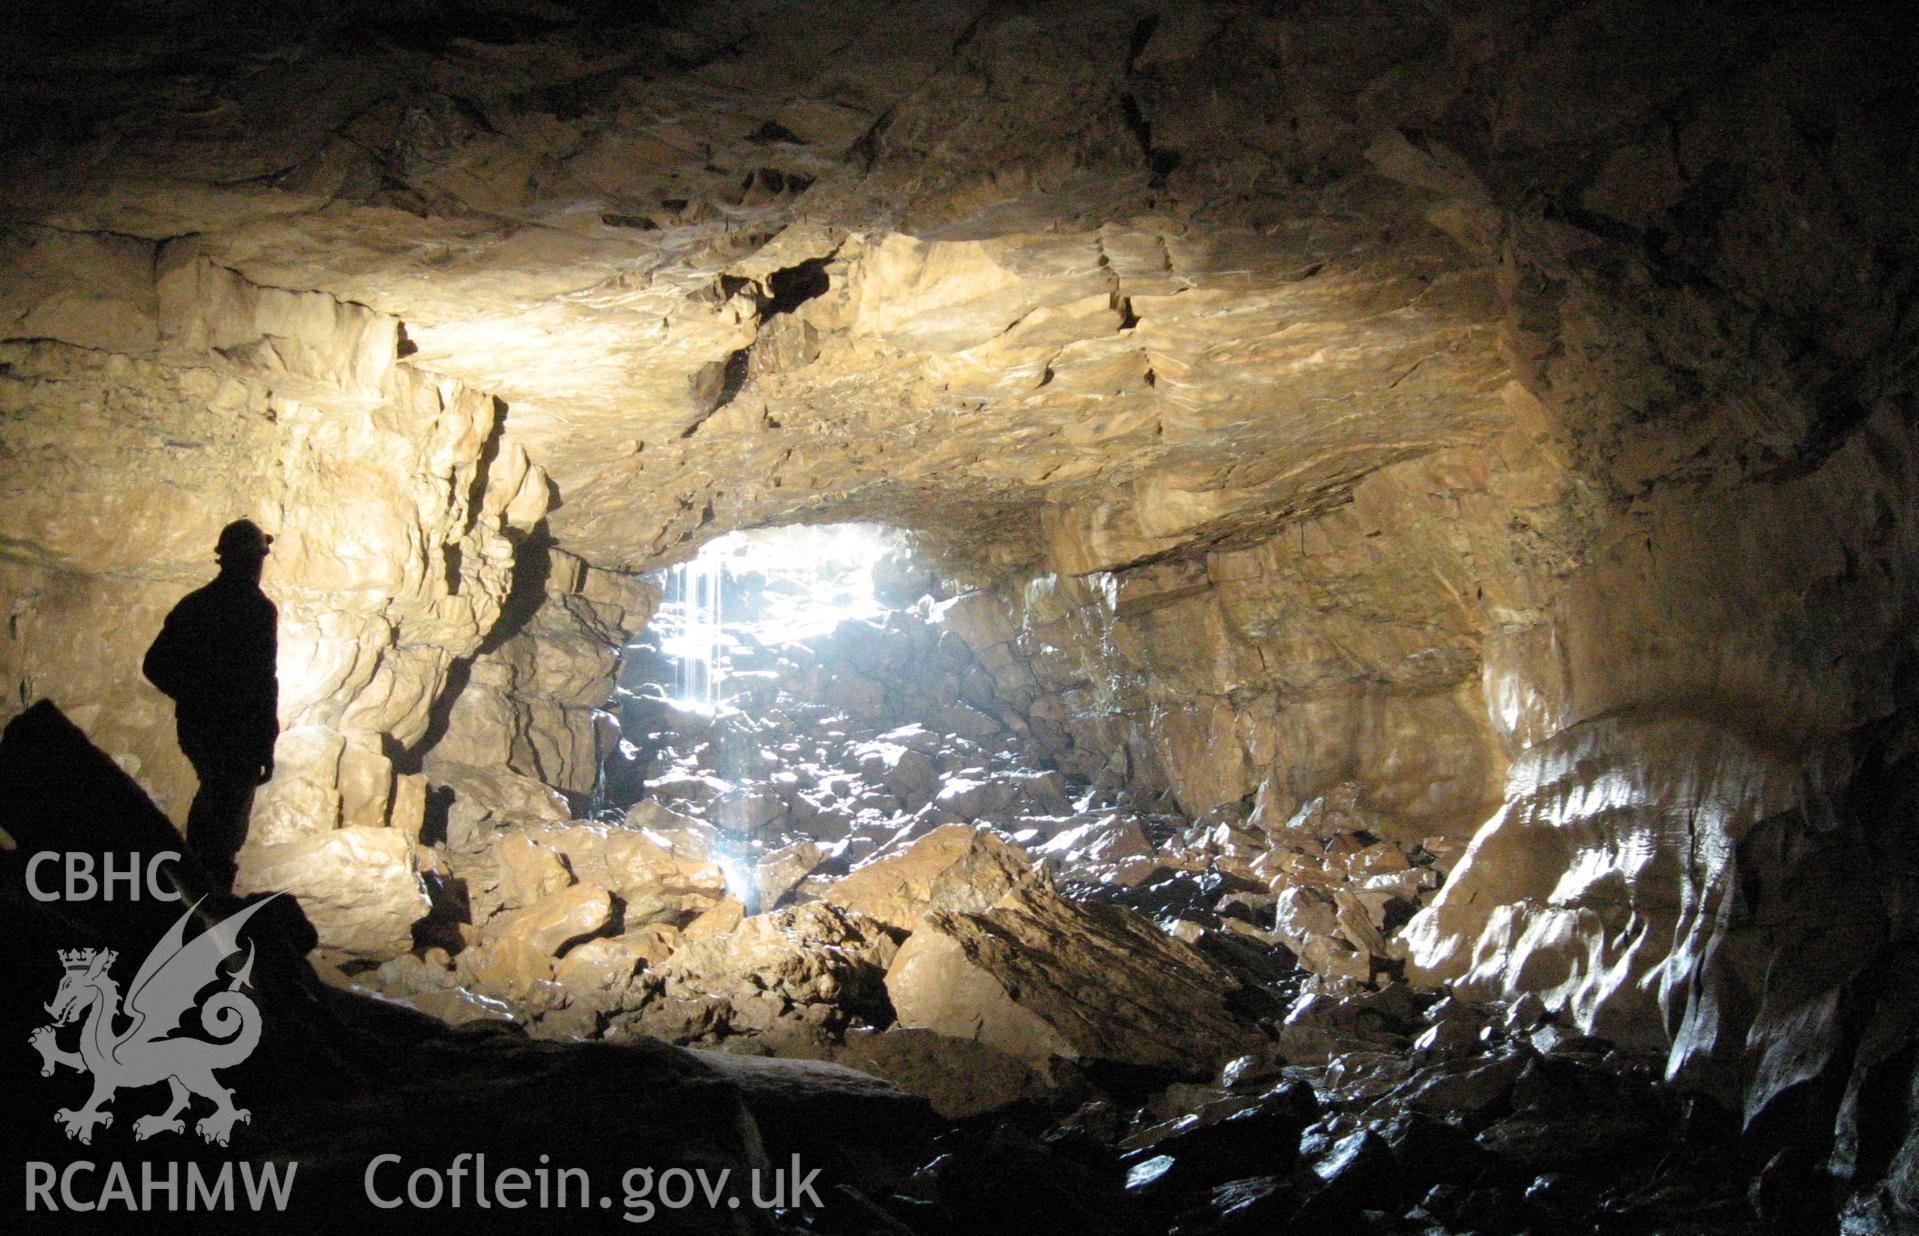 Colour photo of Eglwysfaen Cave, taken by Paul R. Davis and dated 25th June 2008.